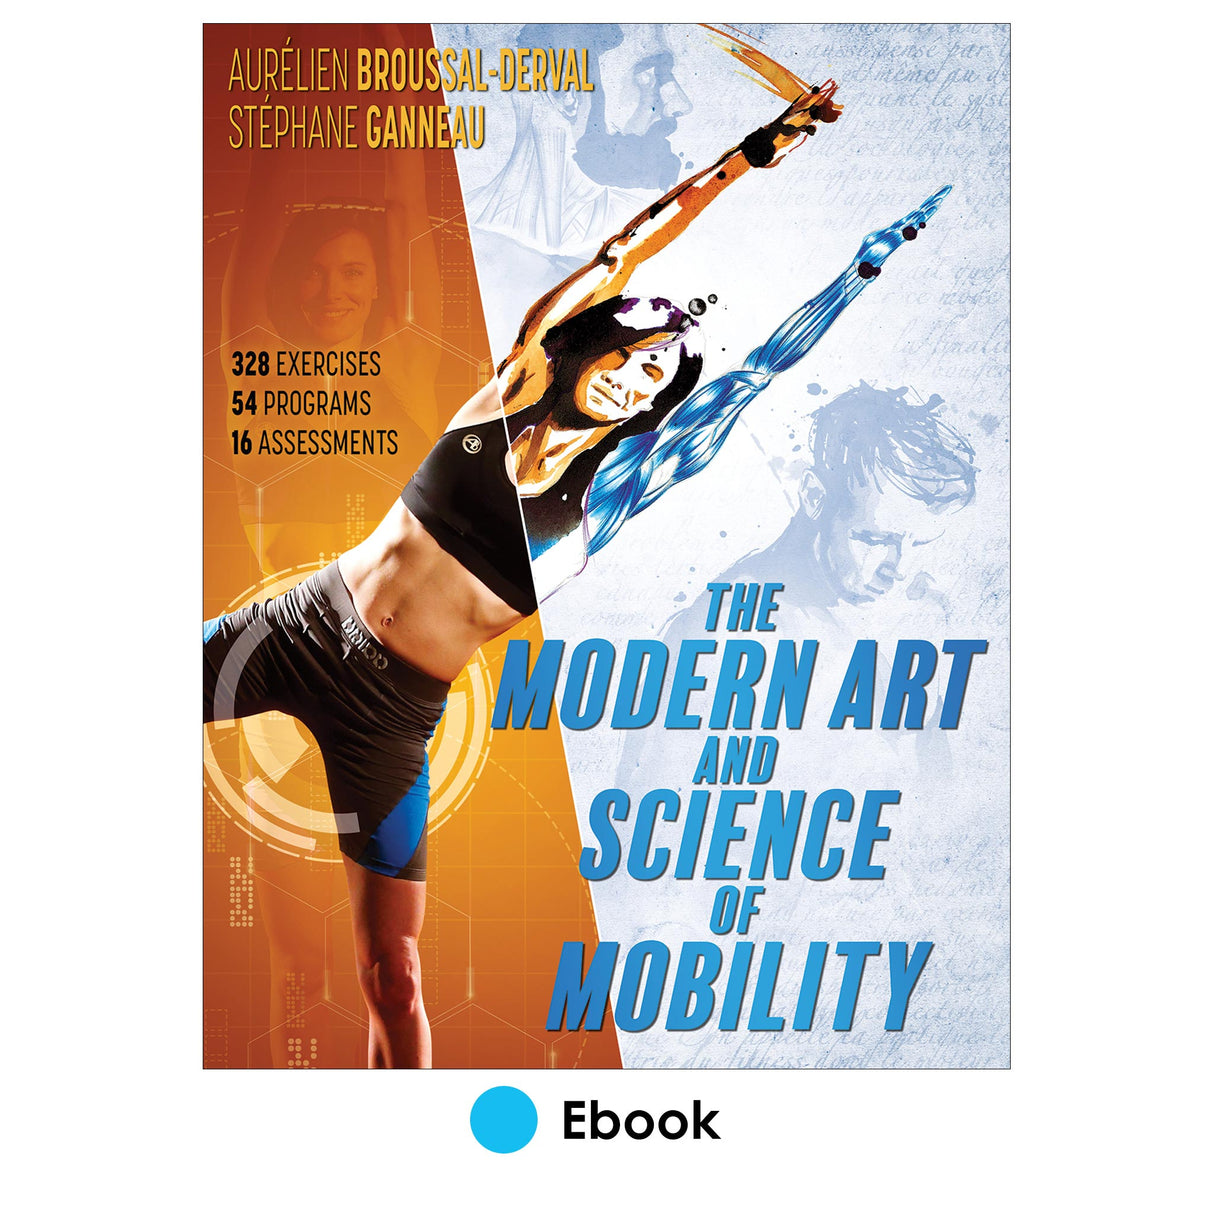 Modern Art and Science of Mobility epub, The